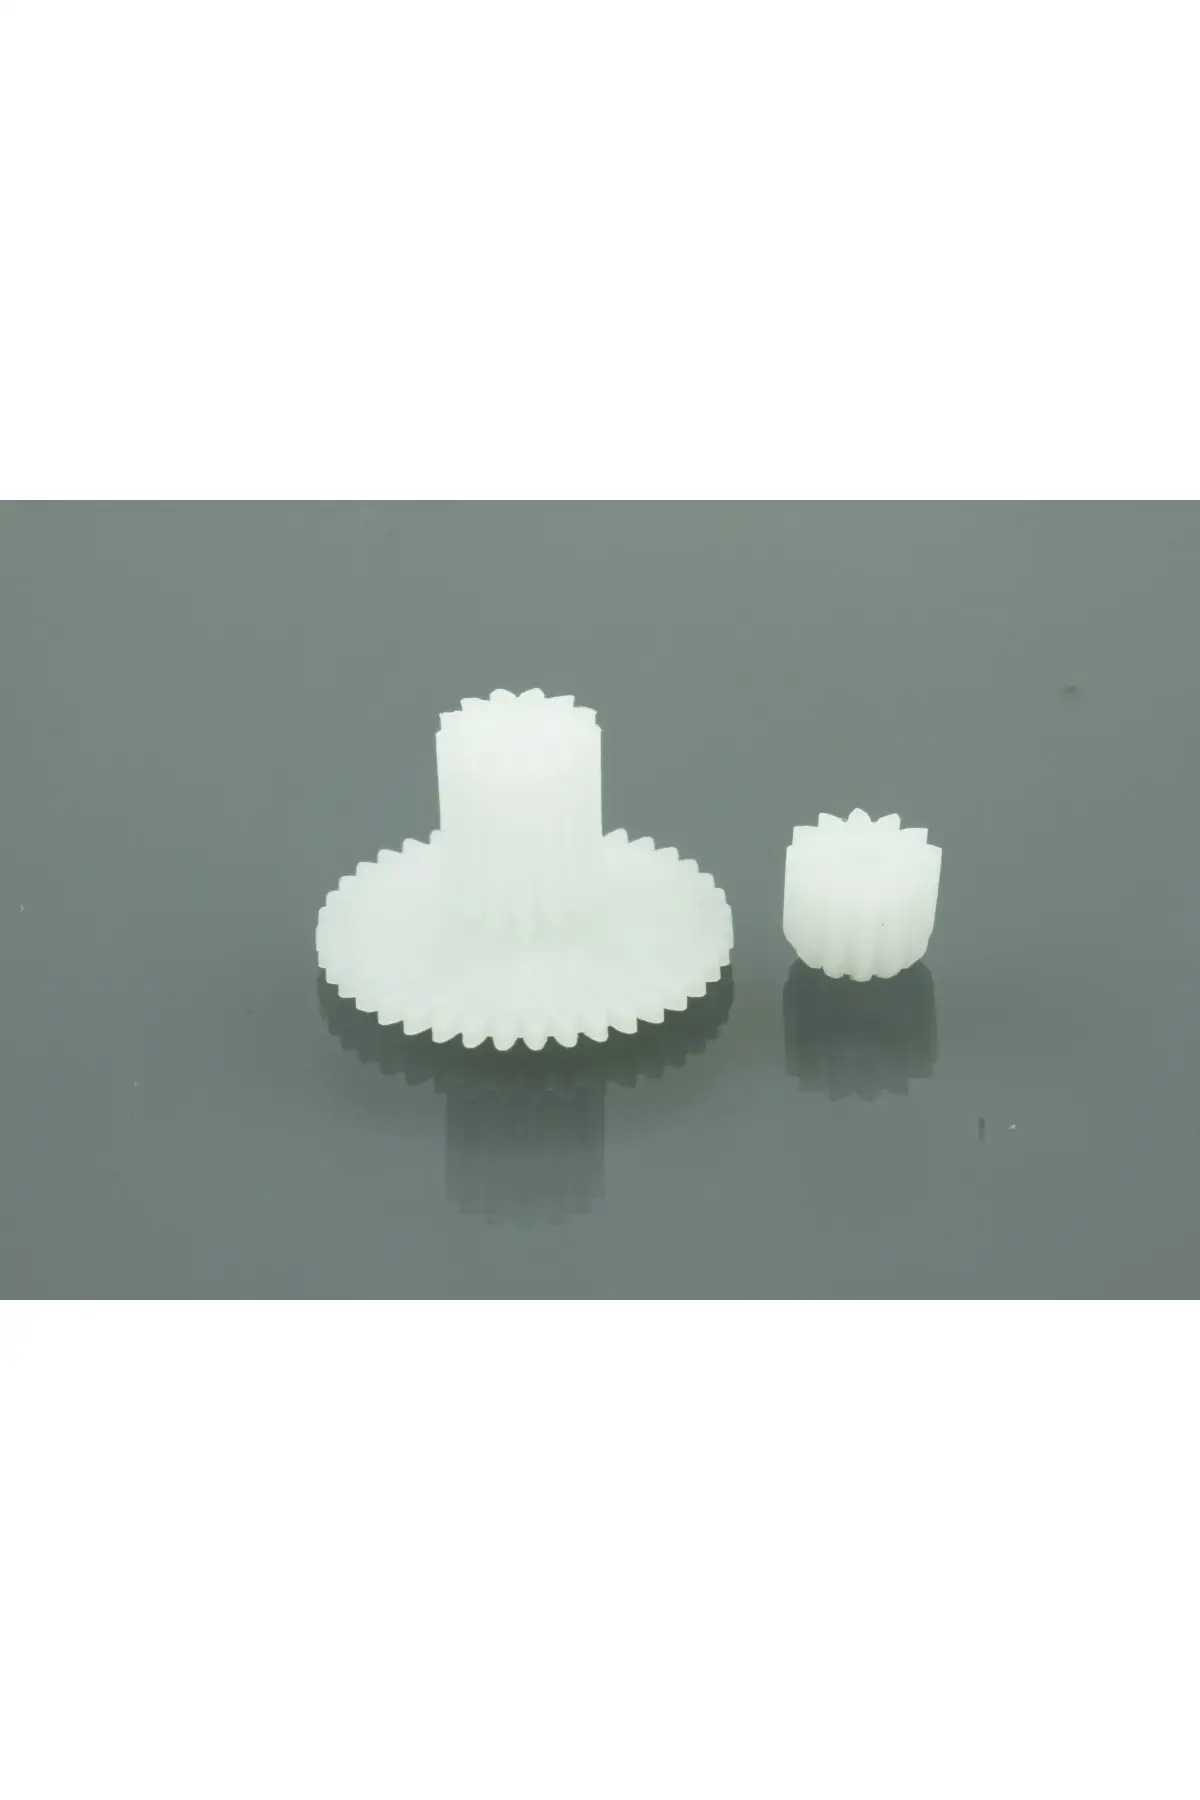 Hair Removal Equivalent Gear Spare Parts запчасти zdracing zd racing parts 11t pion gear cnc